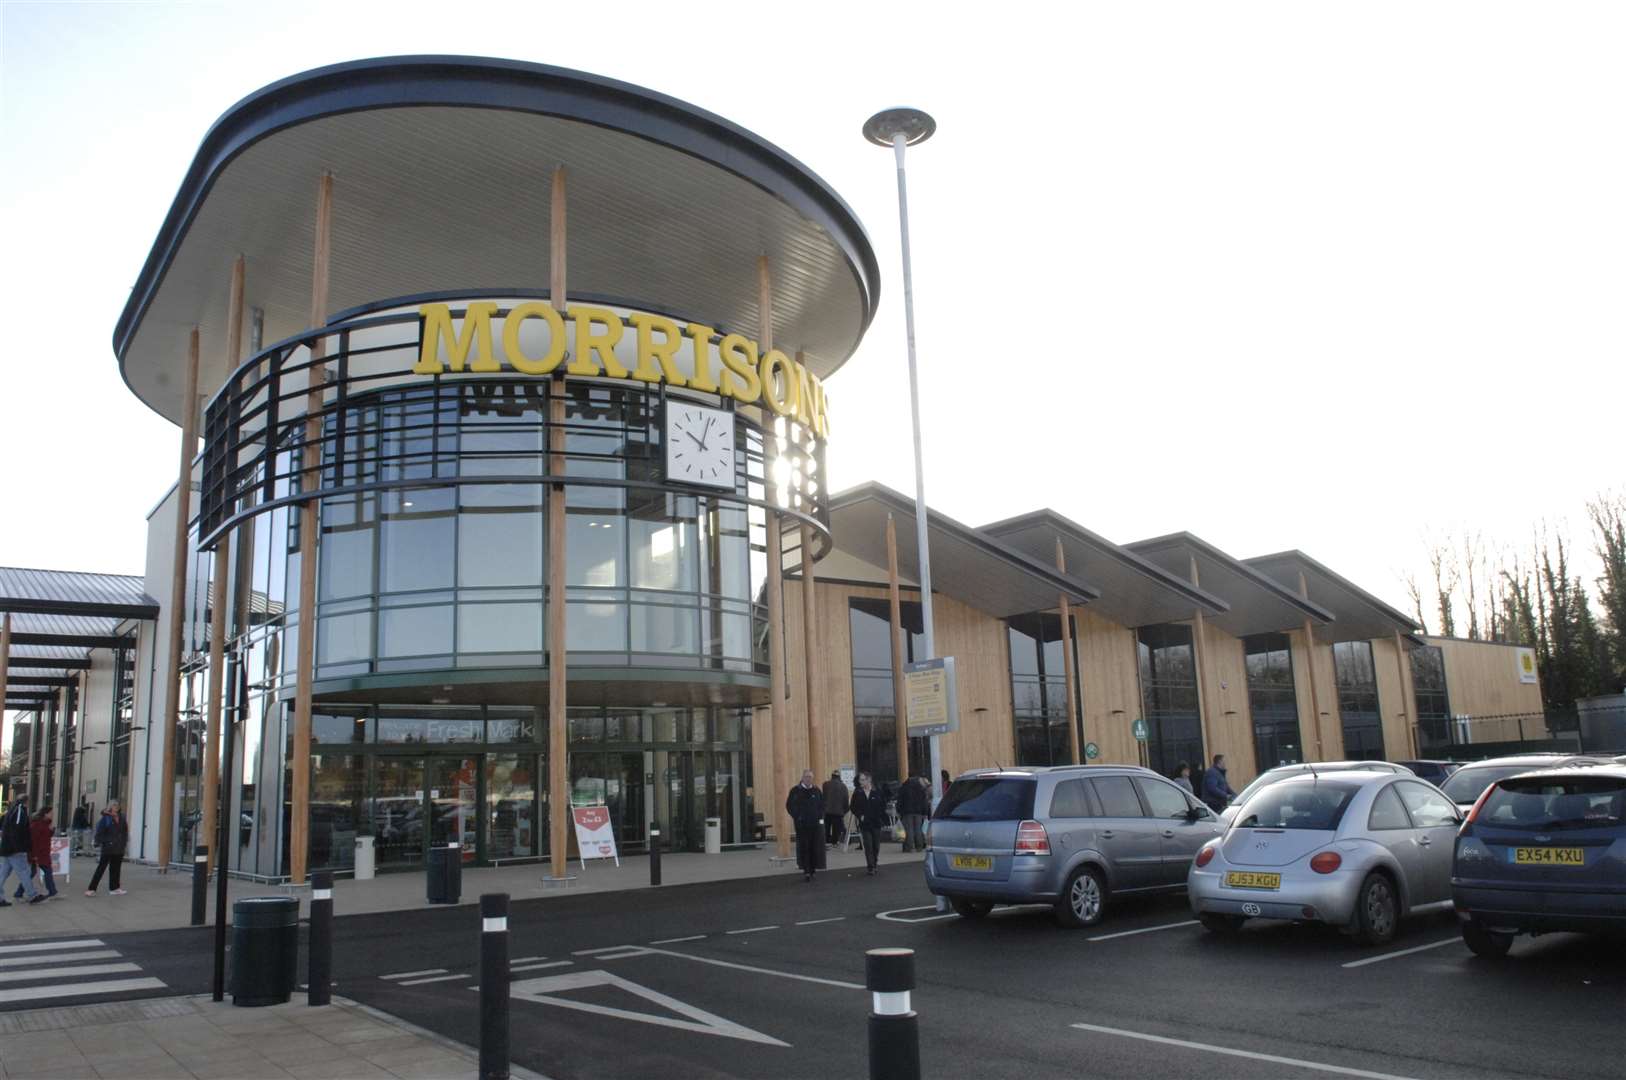 The Morrisons store in in Mill Way Sittingbourne